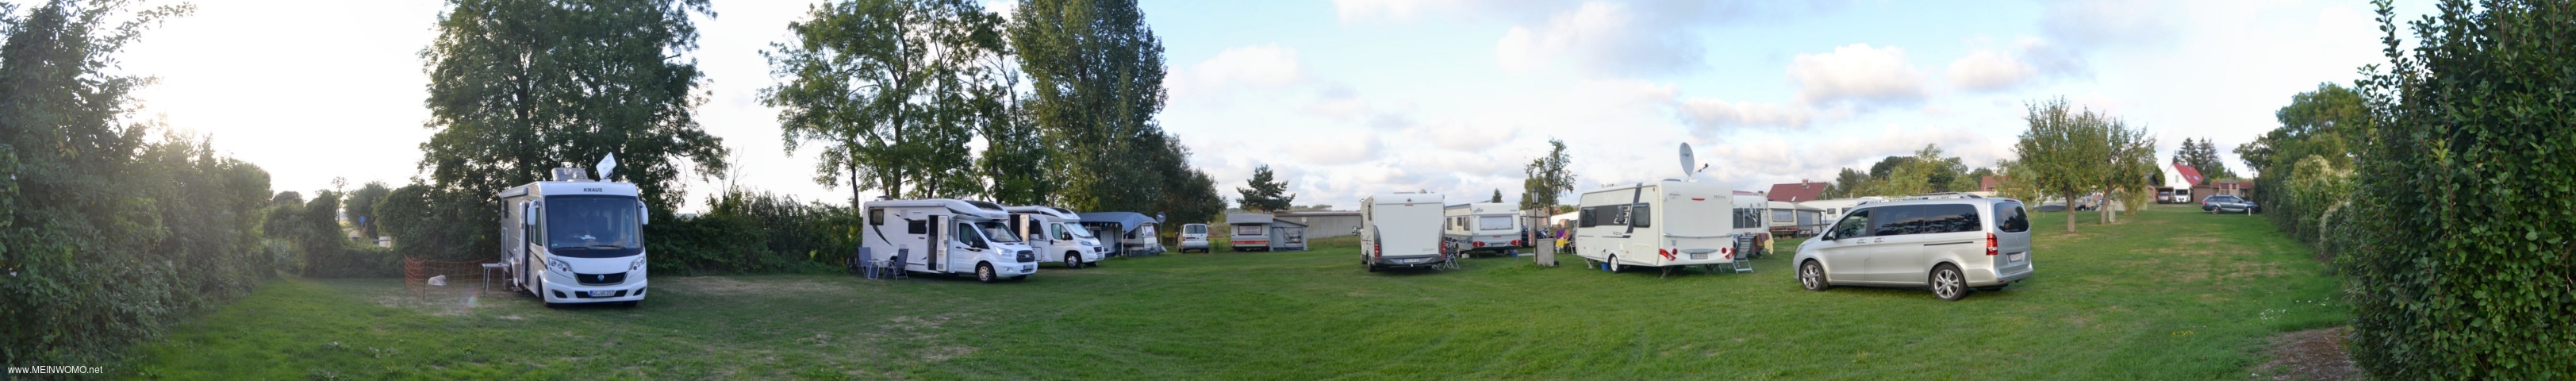  Panoramic view over the lower part of the campsite